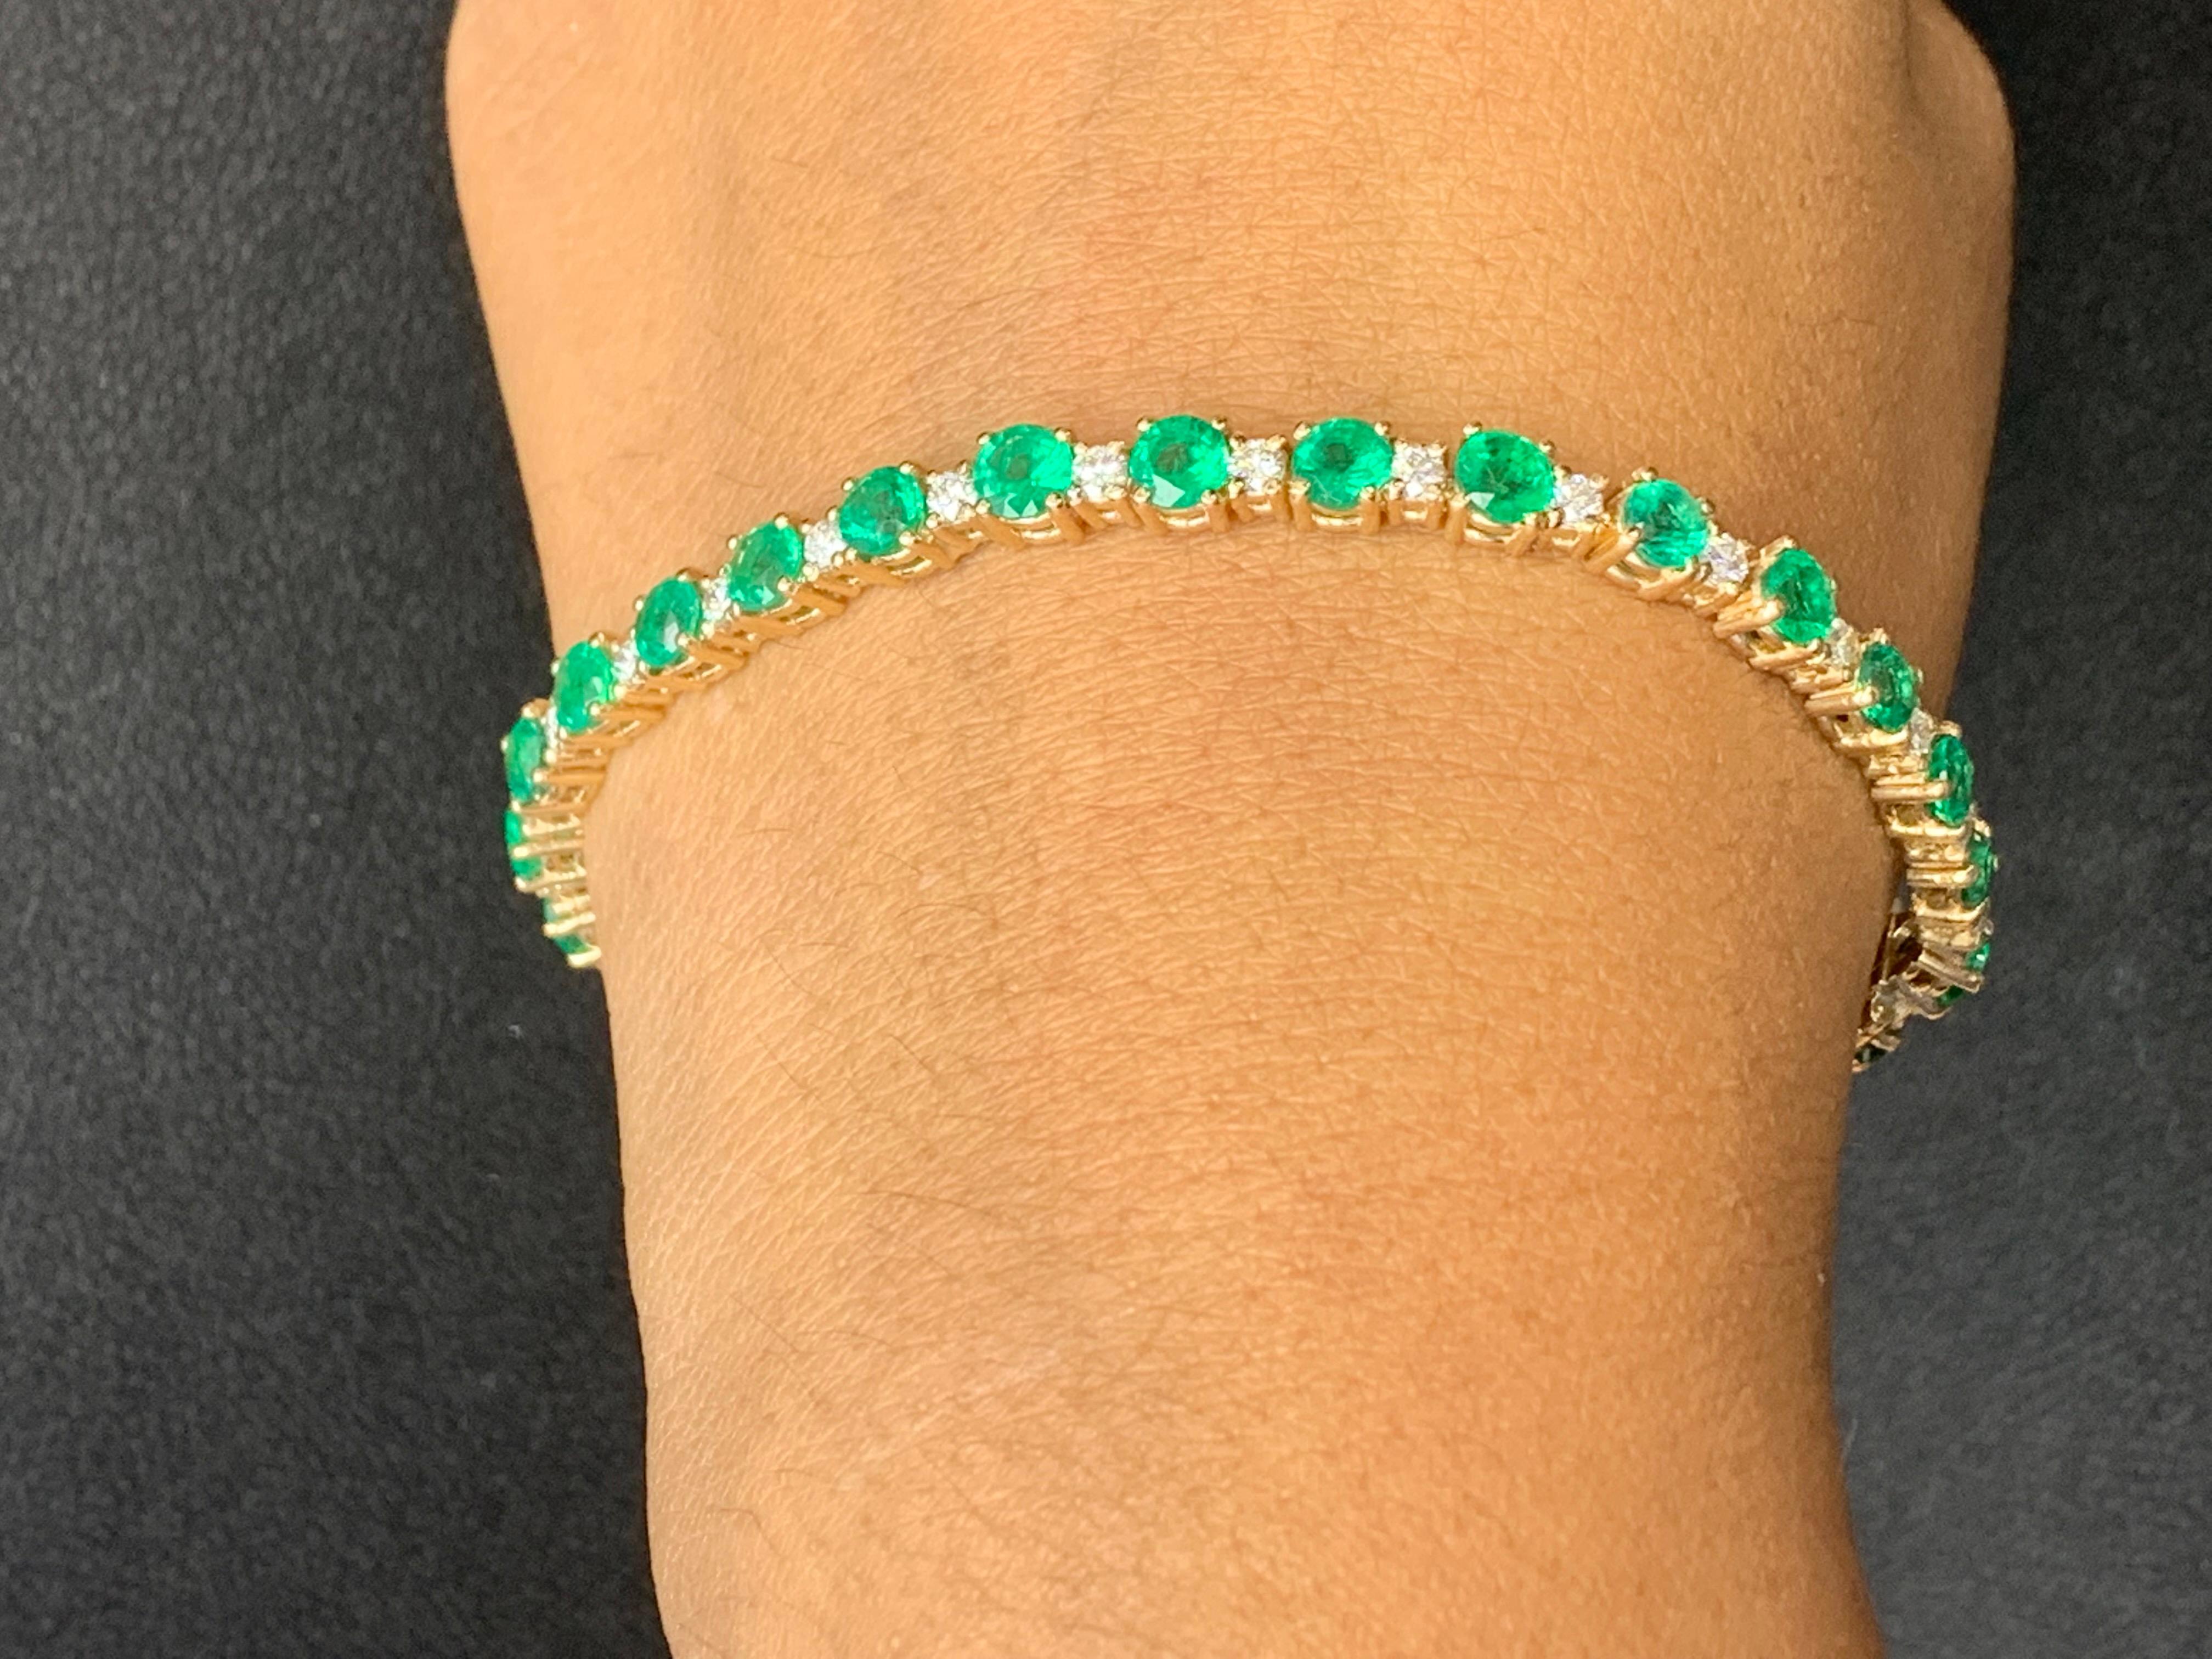 6.70 Carat Alternating Emerald and Diamond Tennis Bracelet in 14K Yellow Gold For Sale 3